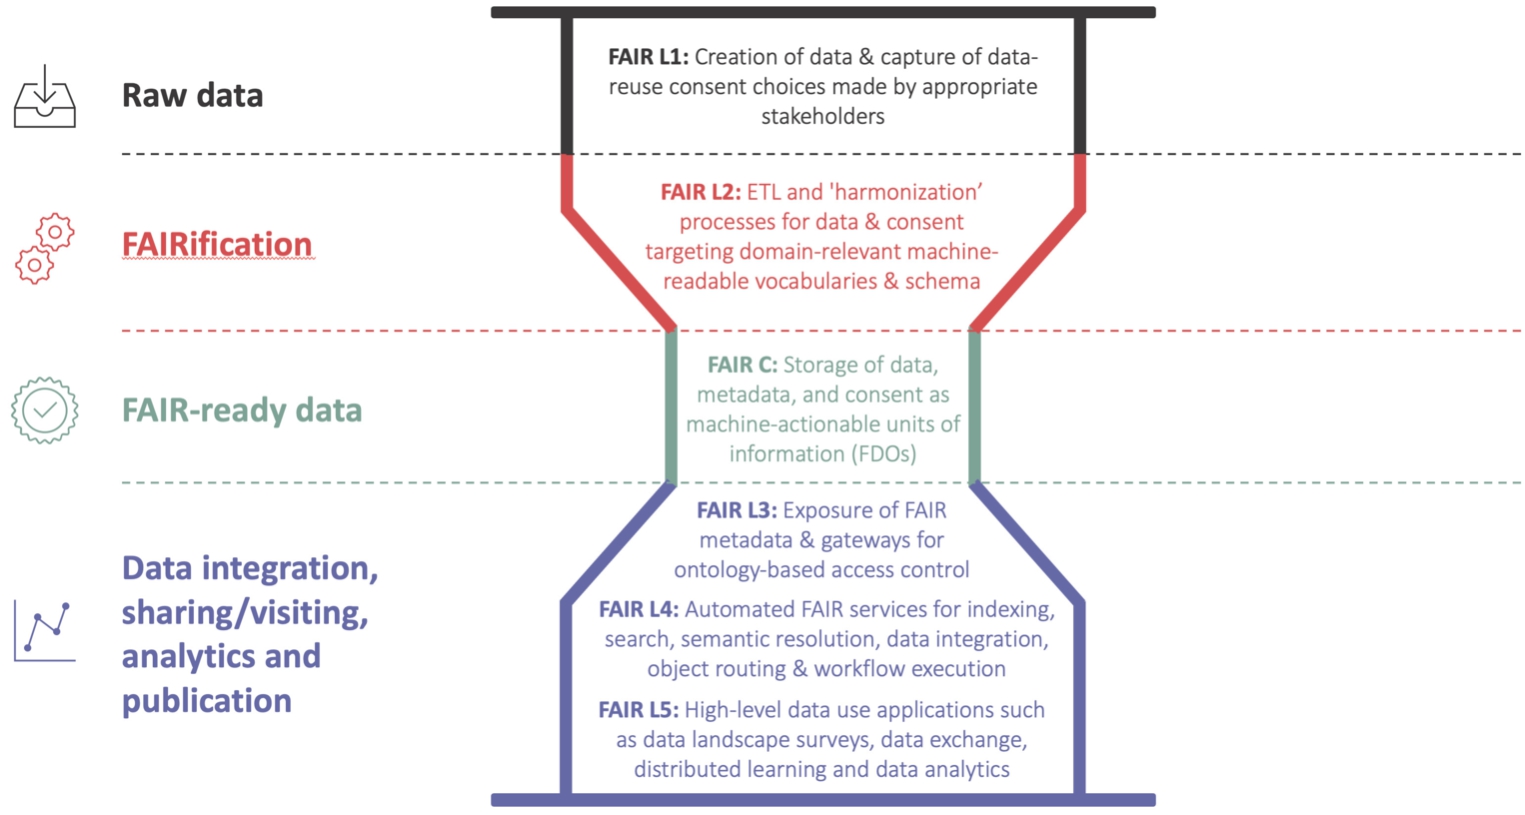 Adapted from [18]. The FAIR Hourglass Model showcasing the raw data at the top which can then be made into FAIR data through a FAIRification process, culminating in machine-actionable units of information (FDOs) that can be used at a later stage by a wide variety of tools and services.